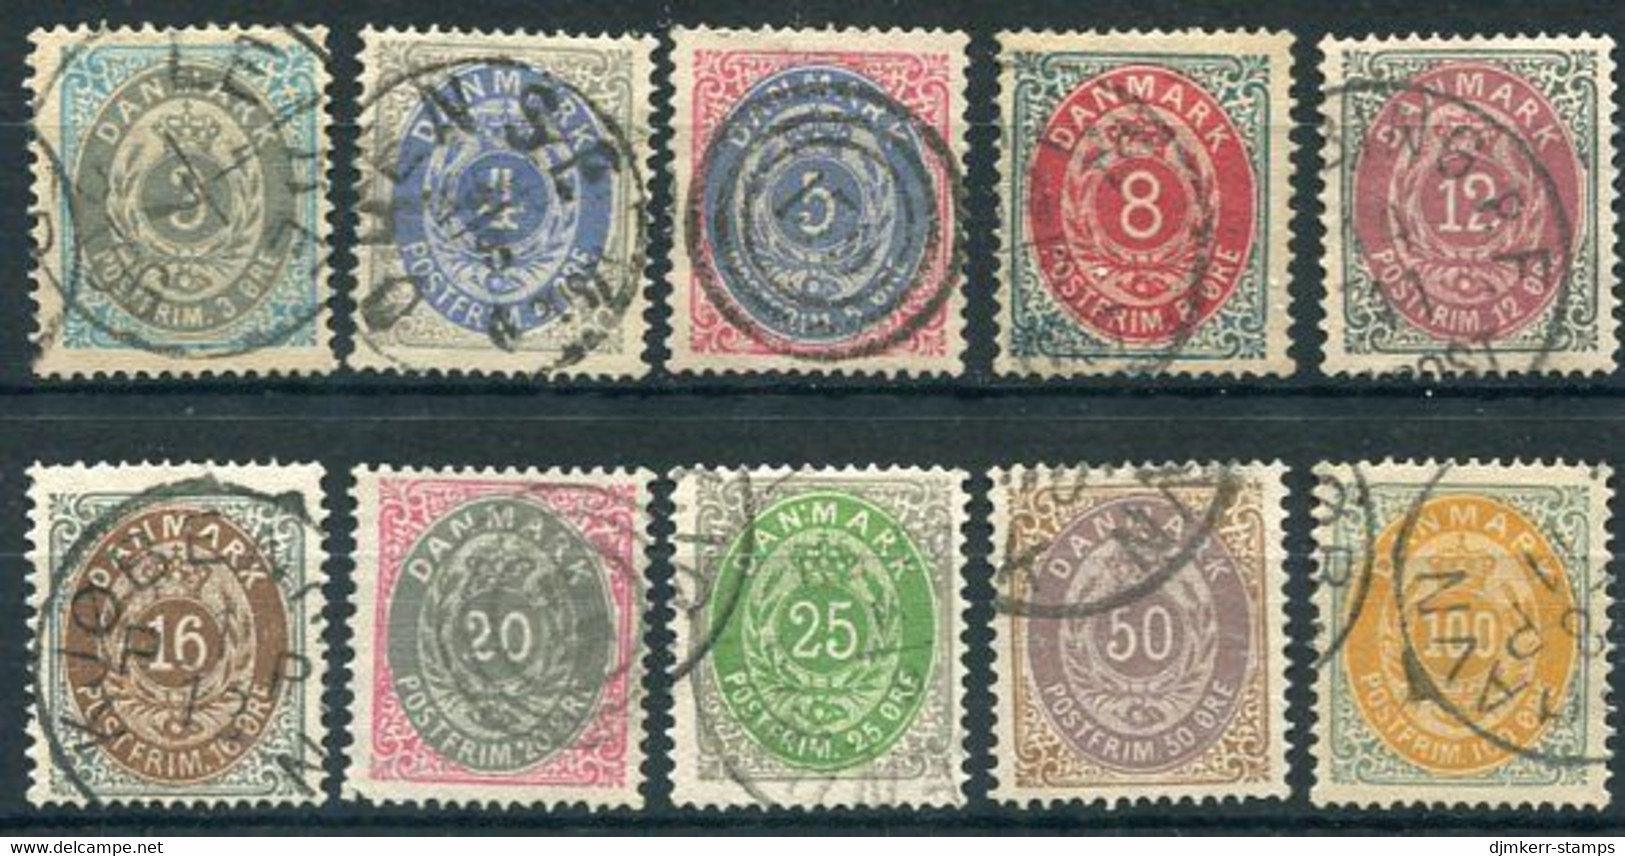 DENMARK 1875-79 Numeral In Oval Perforated 14x13½ Set Of Ten, Used - Usado